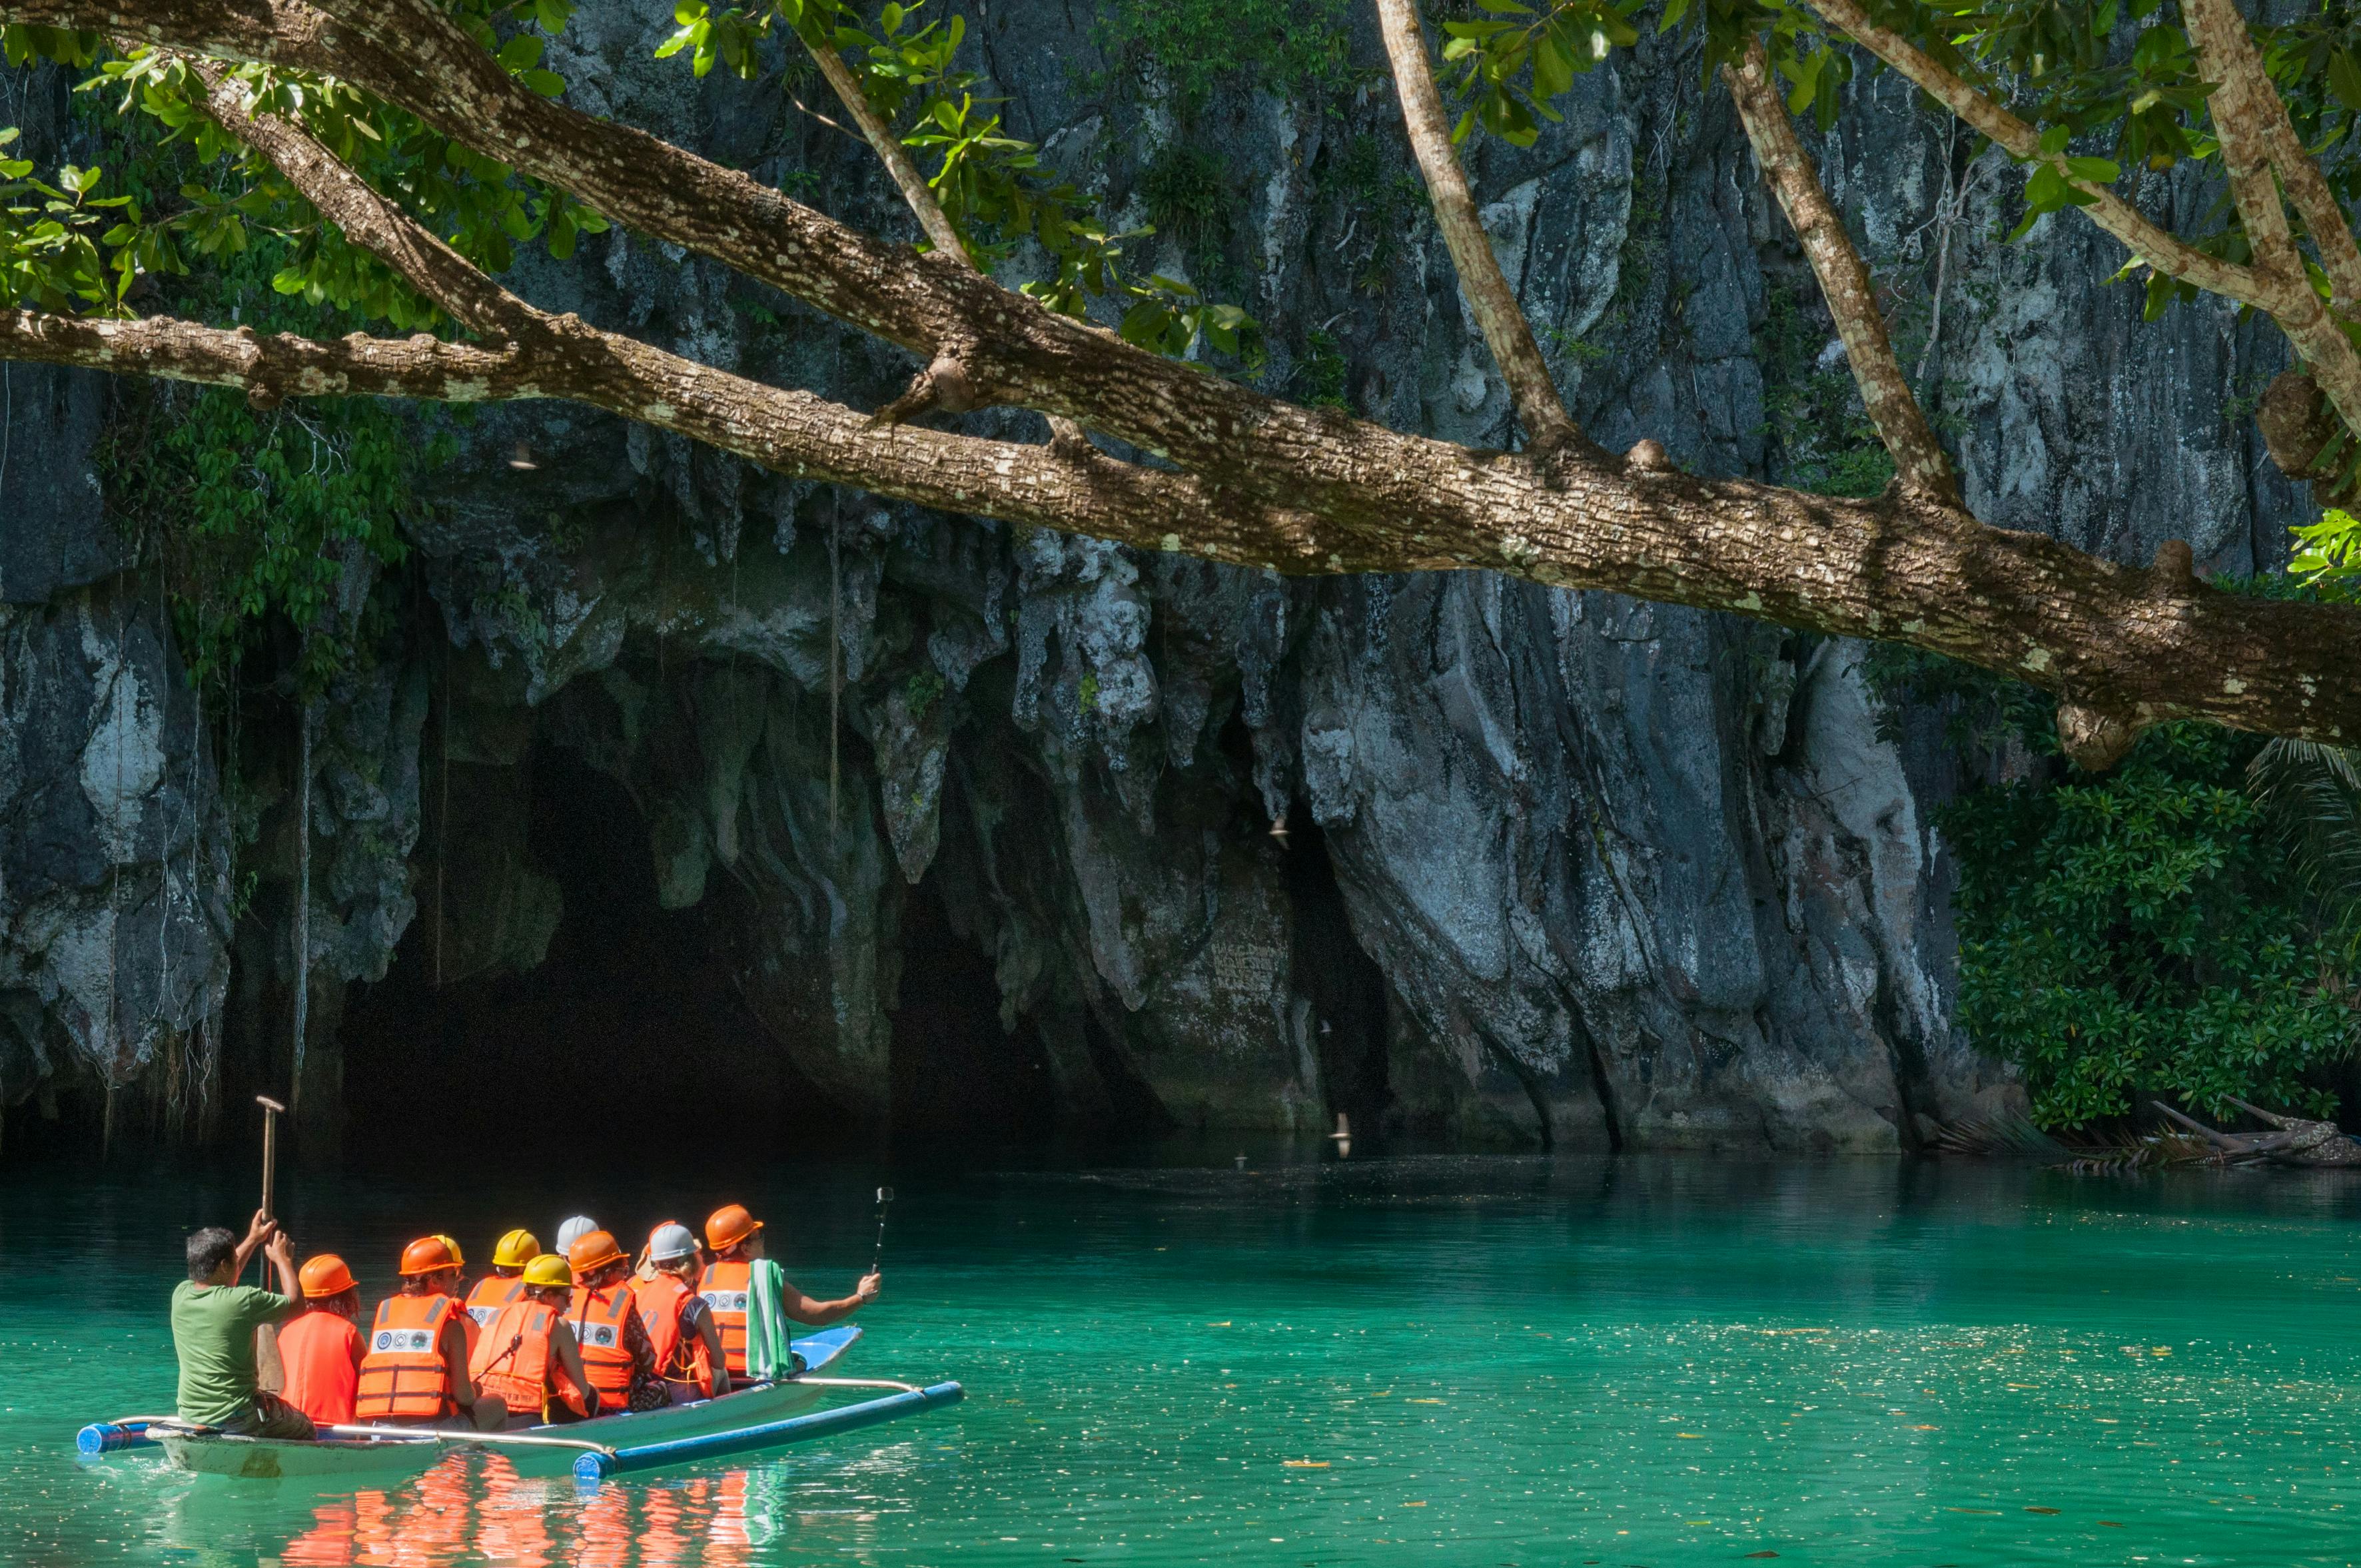 Tourists wearing life vests while going inside the Puerto Princesa Underground River in Palawan